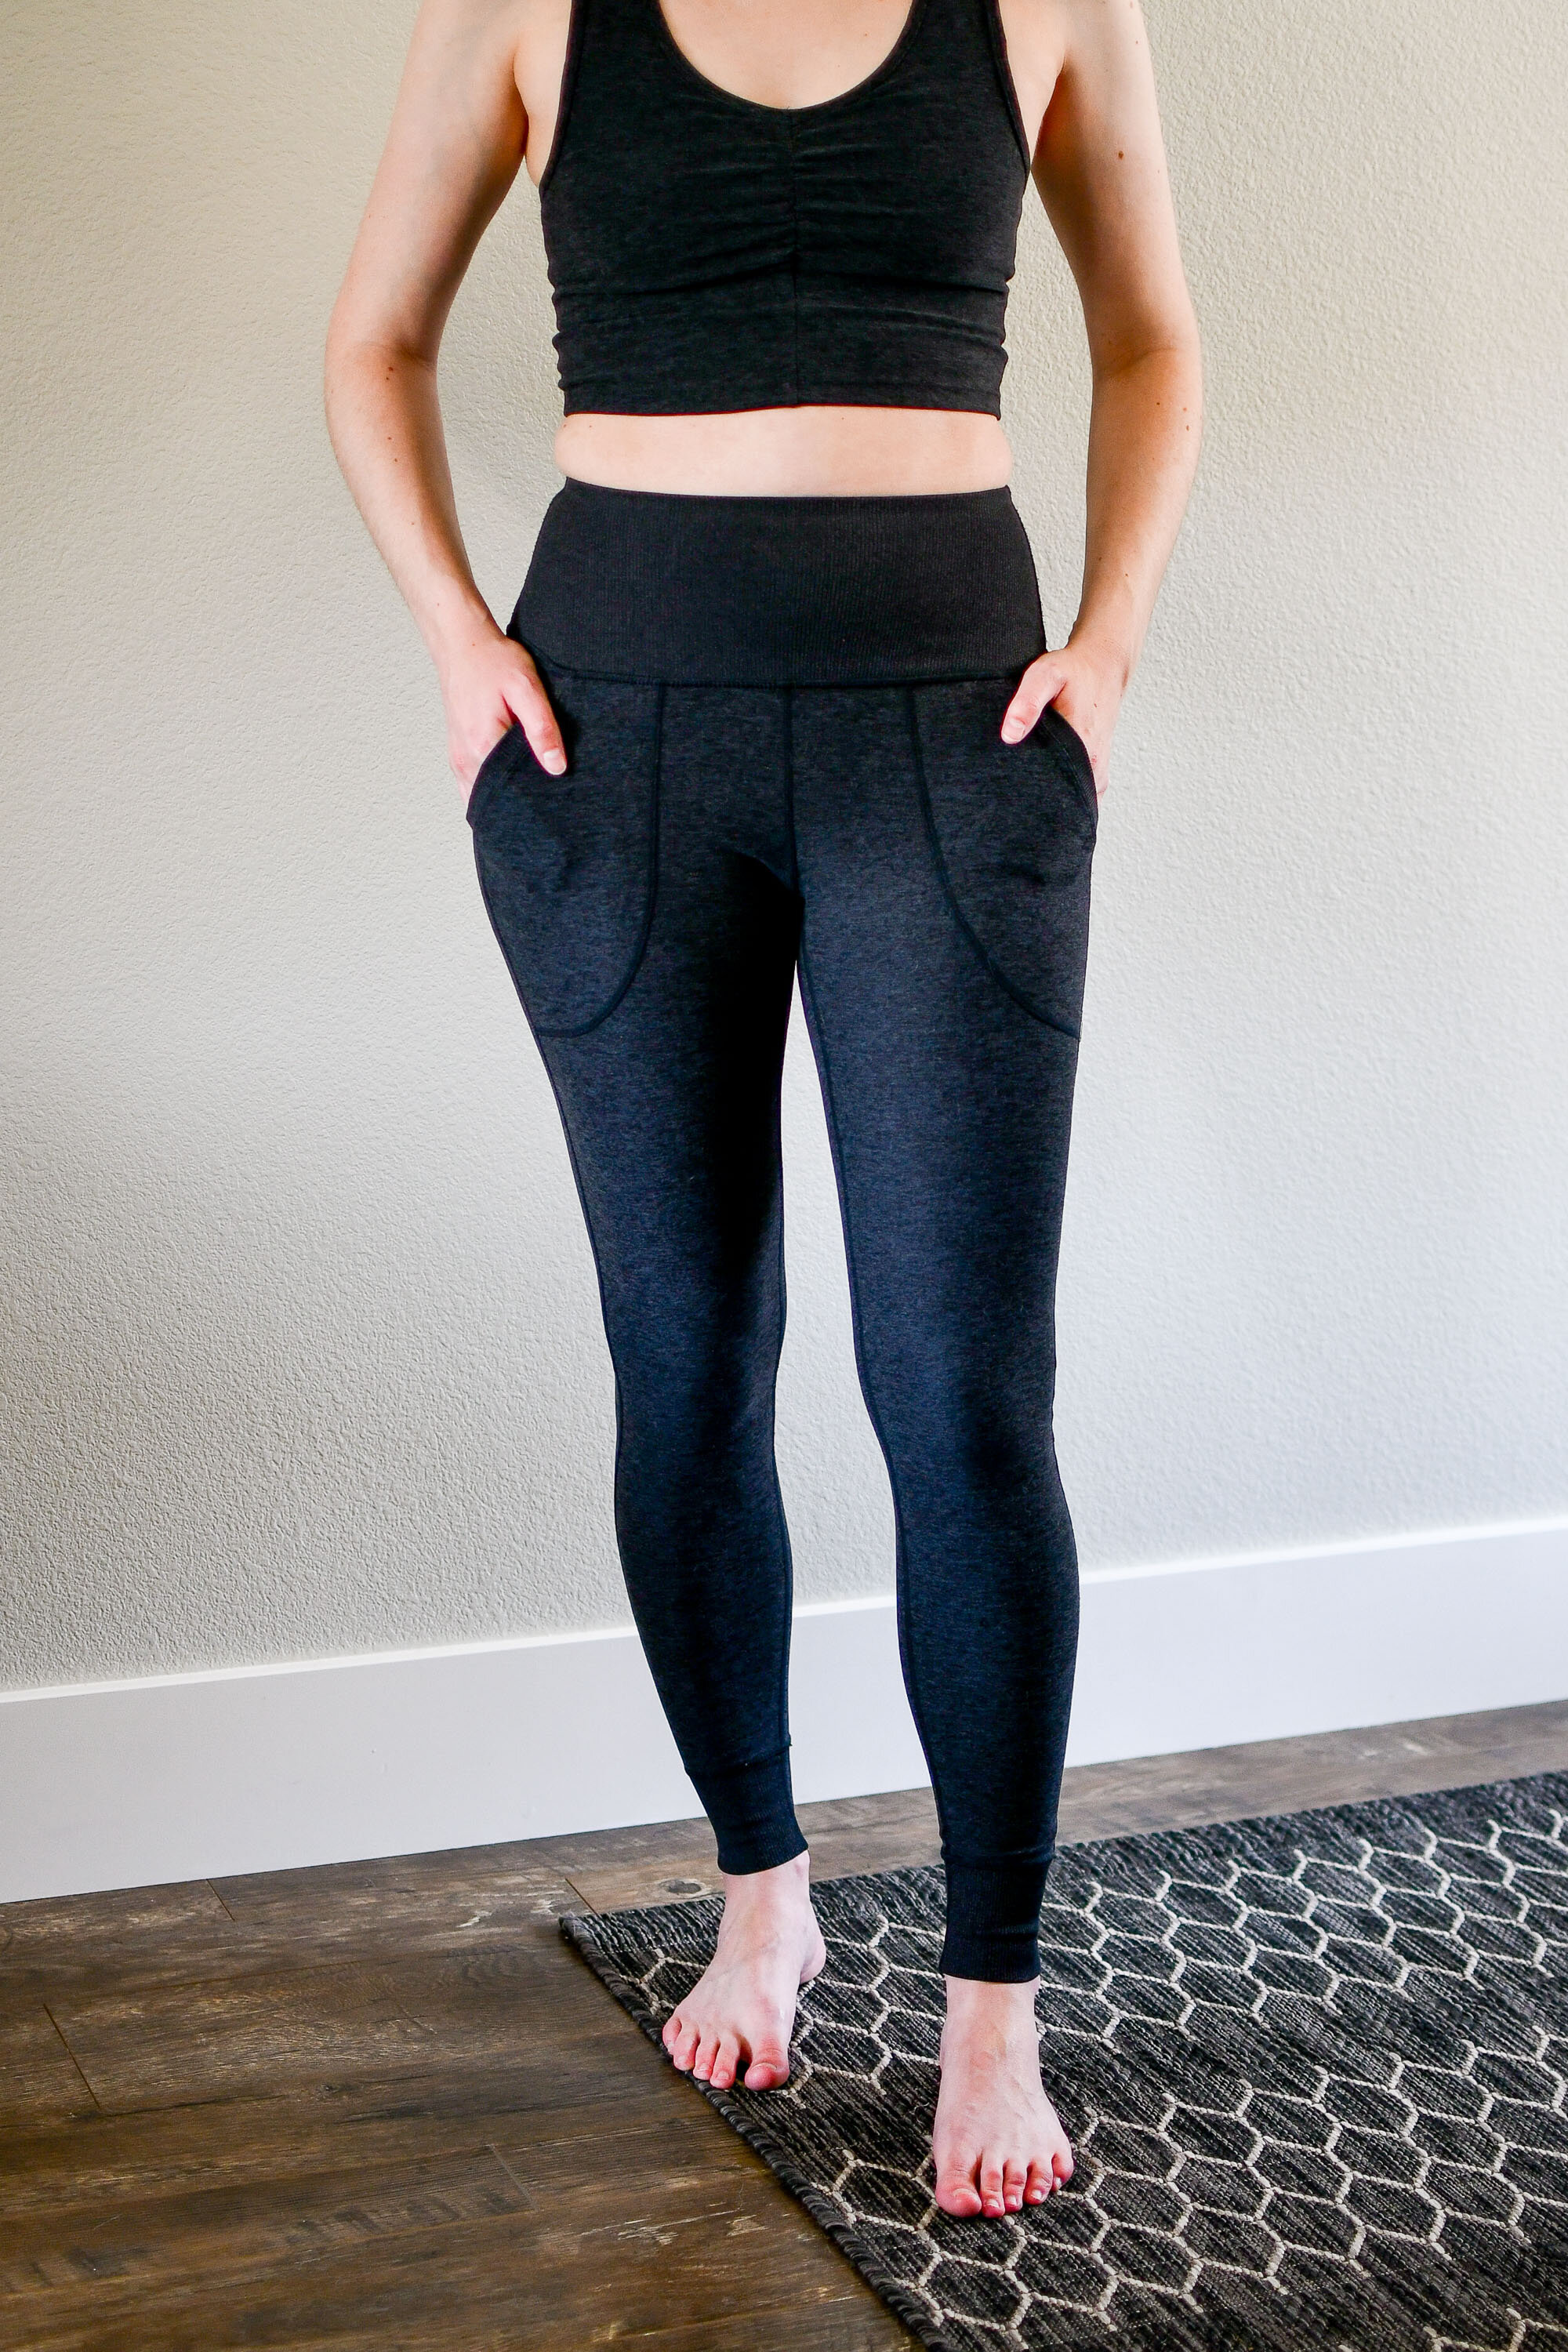 Zella Leggings Small Cropped Black Perforated Mesh Gym Workout